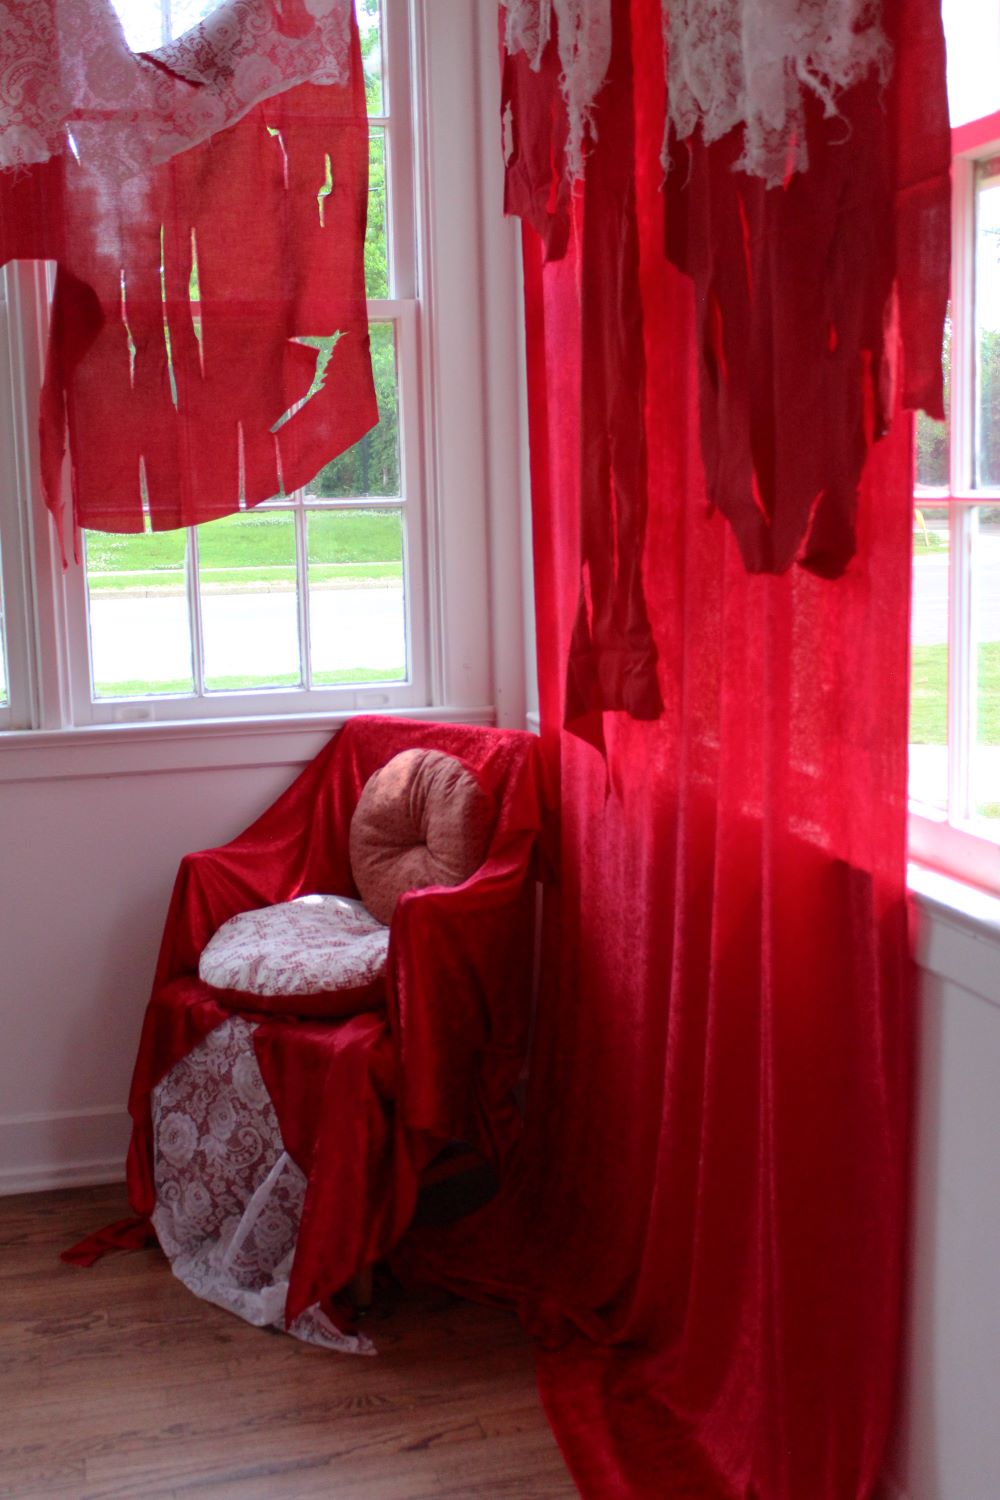 A cushioned chair draped in red, surrounded by tattered red curtains and white walls